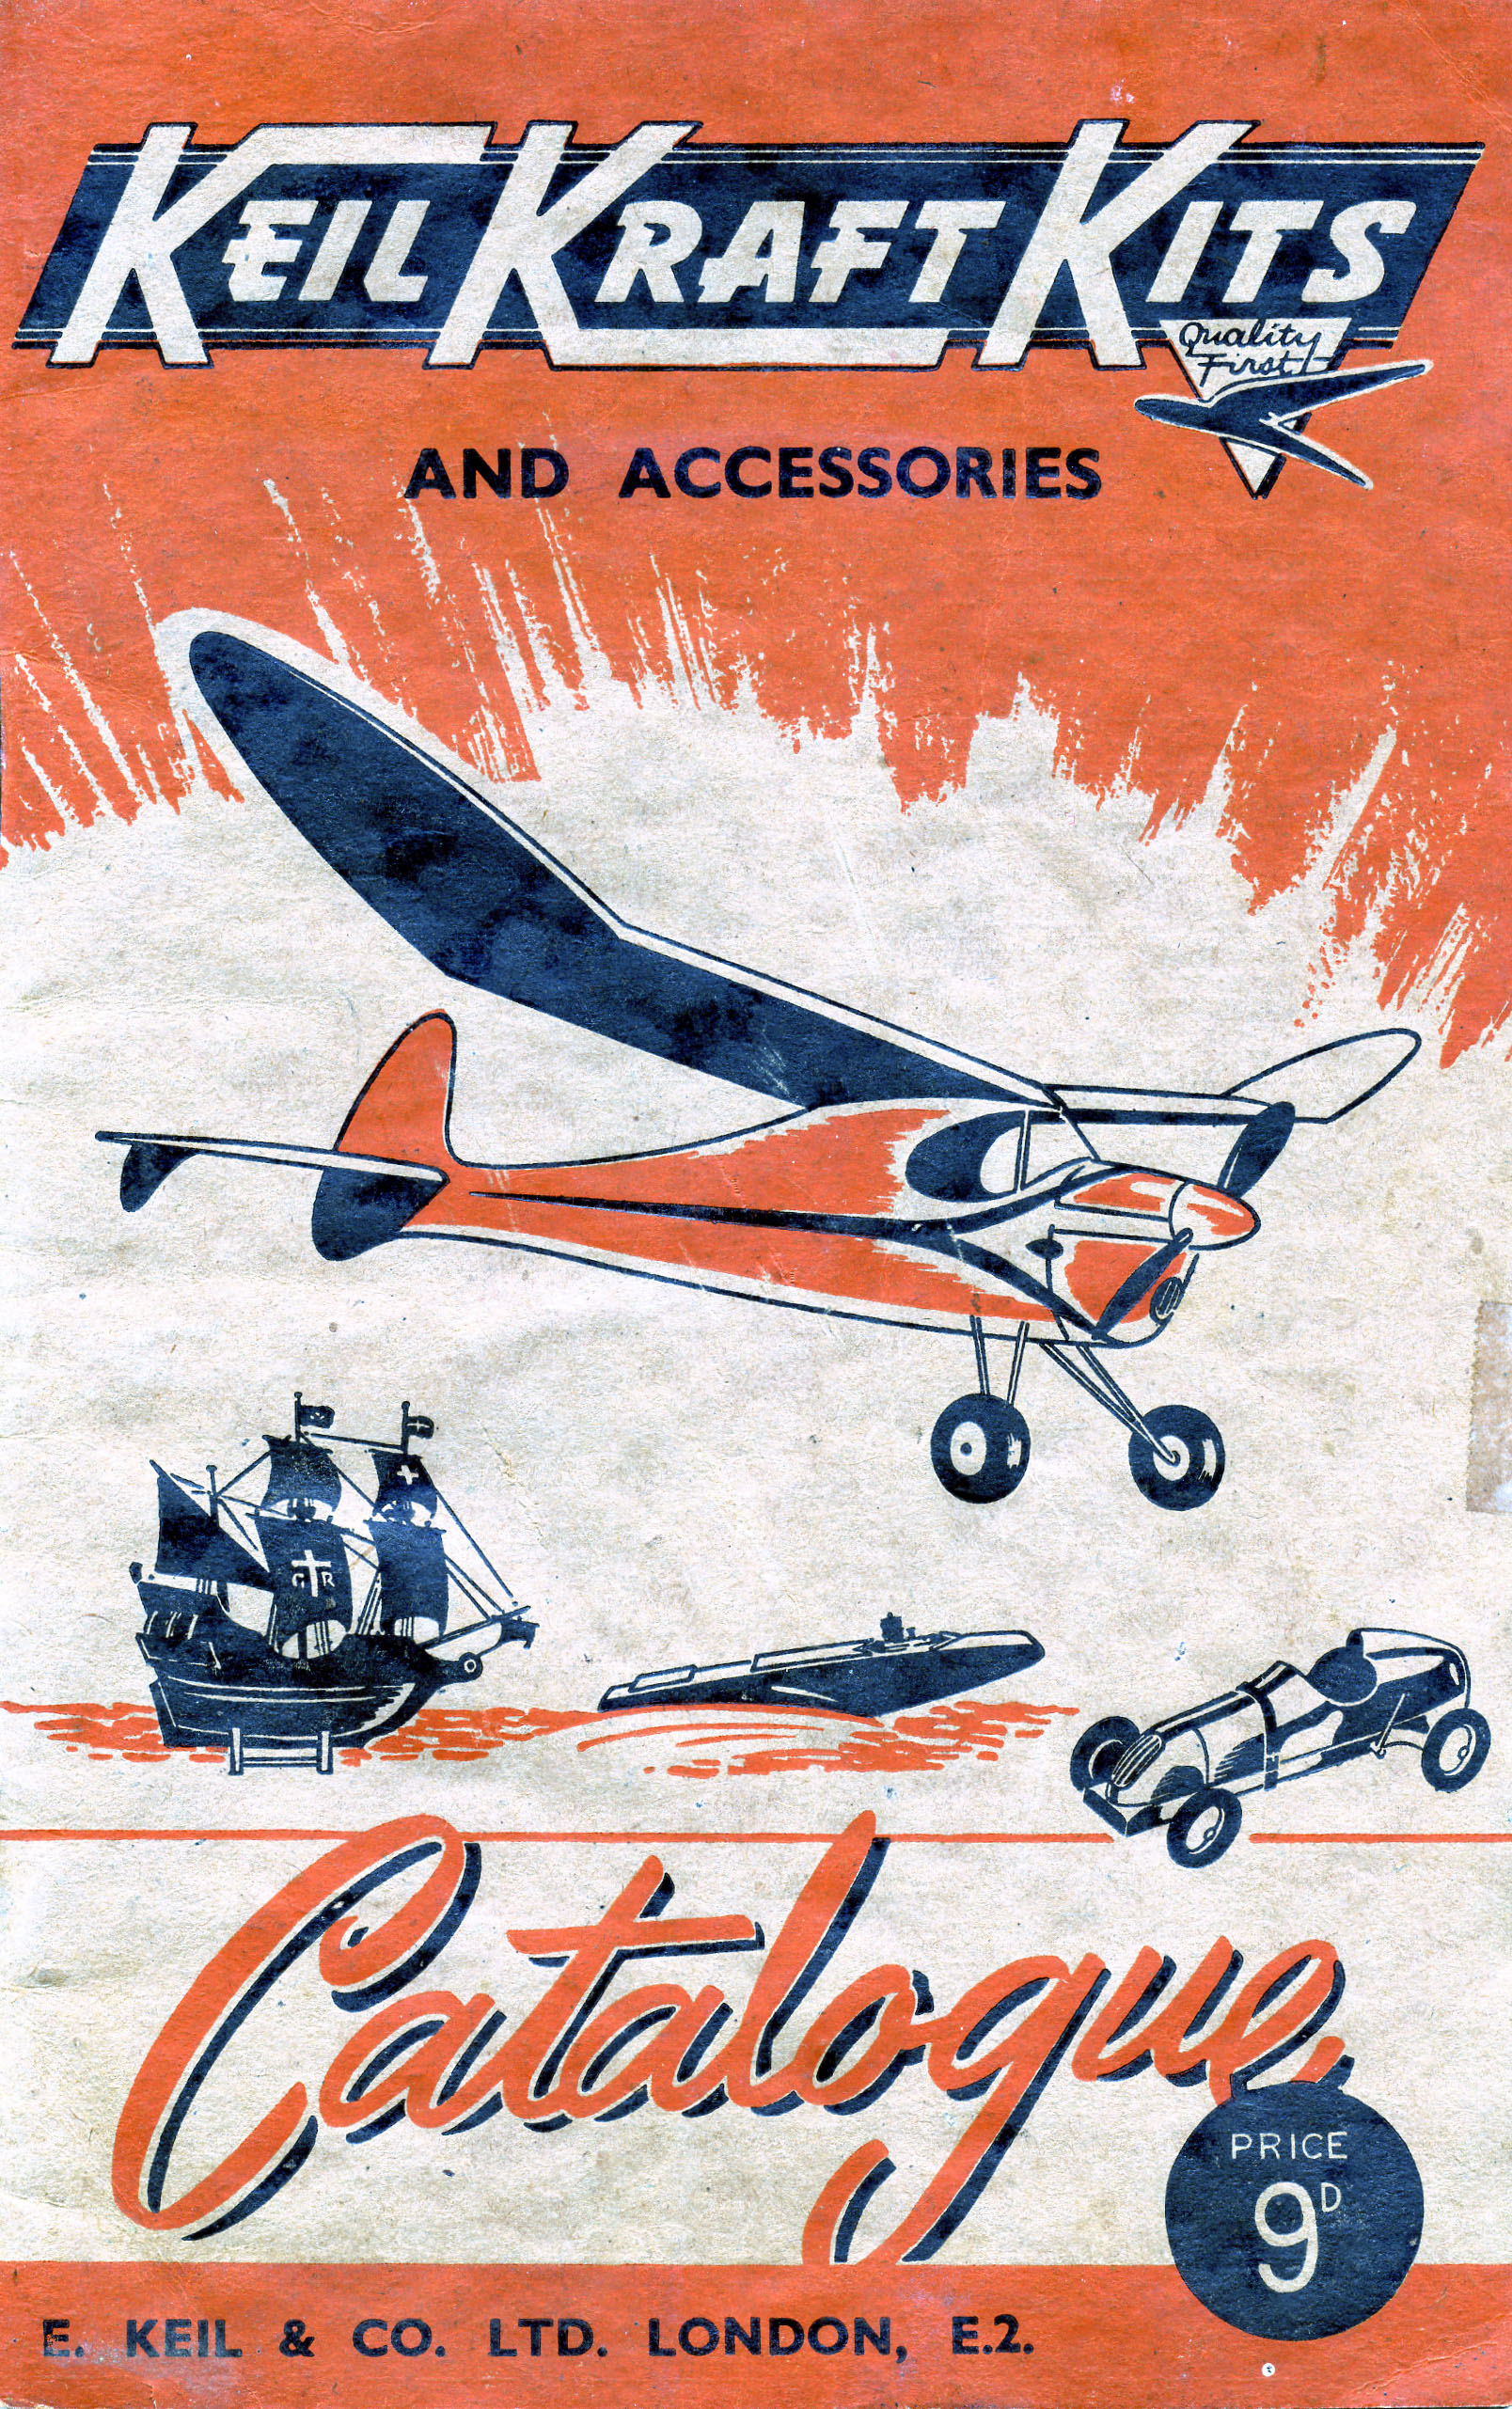 Catalog, Keil Kraft Kits and Accessories, E. Keil & Co. Ltd, 1948. (Source: National Model Aviation Museum Archives, Manufacturers and Companies Collection #0043)